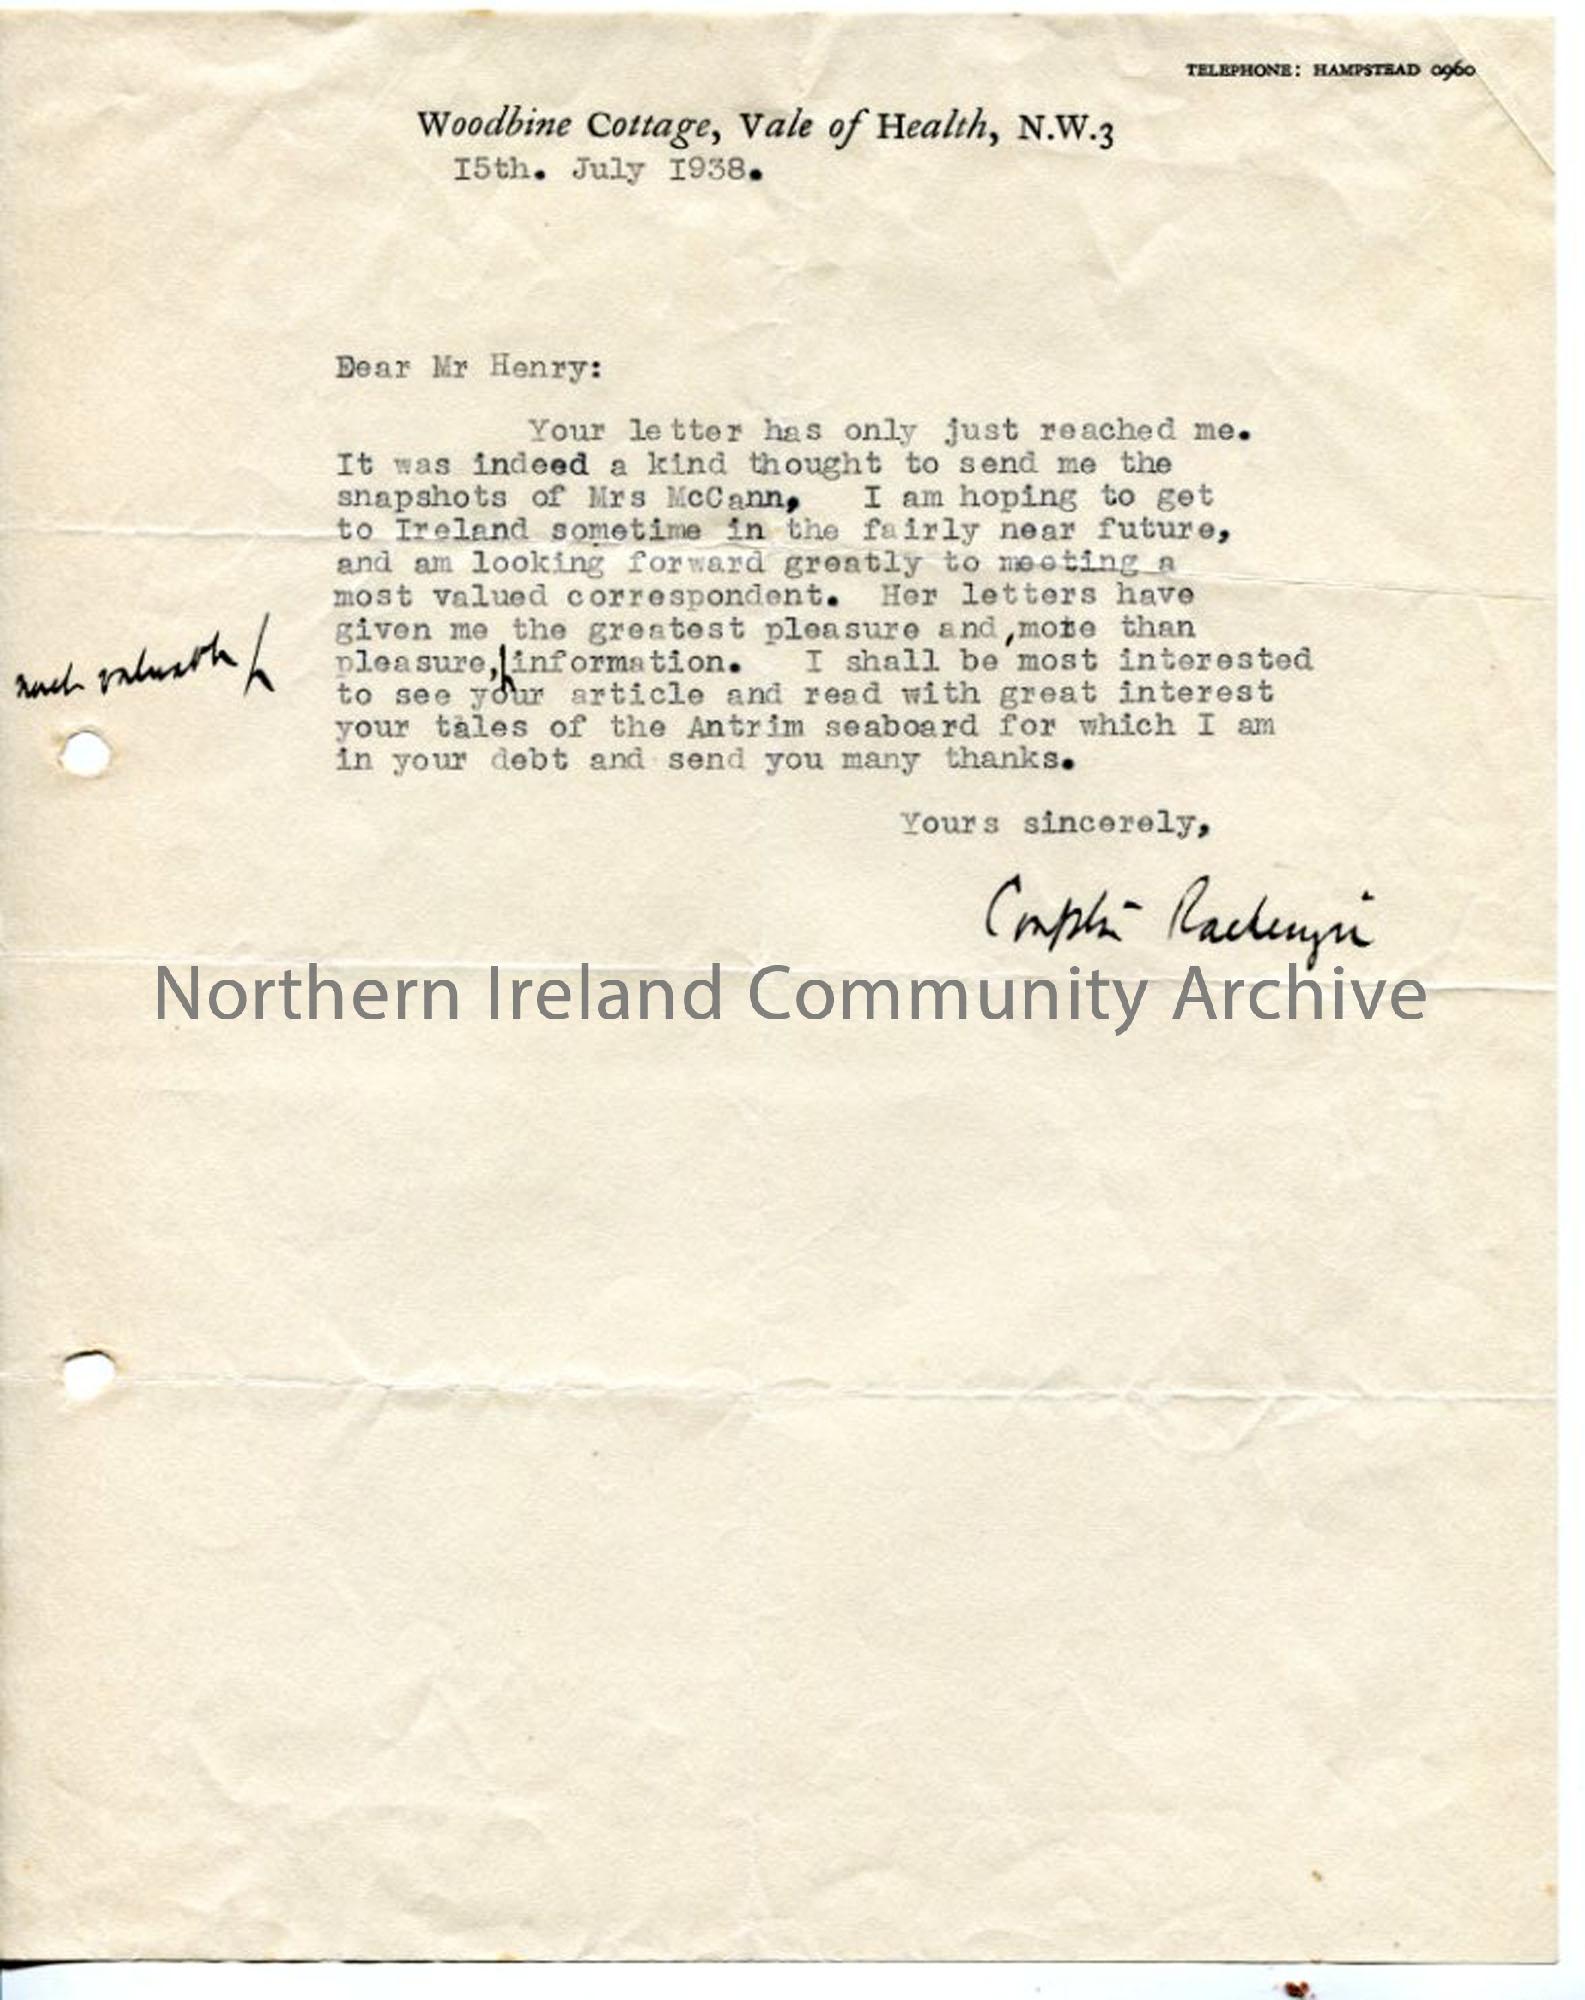 Typed letter from Compton Mackenzie